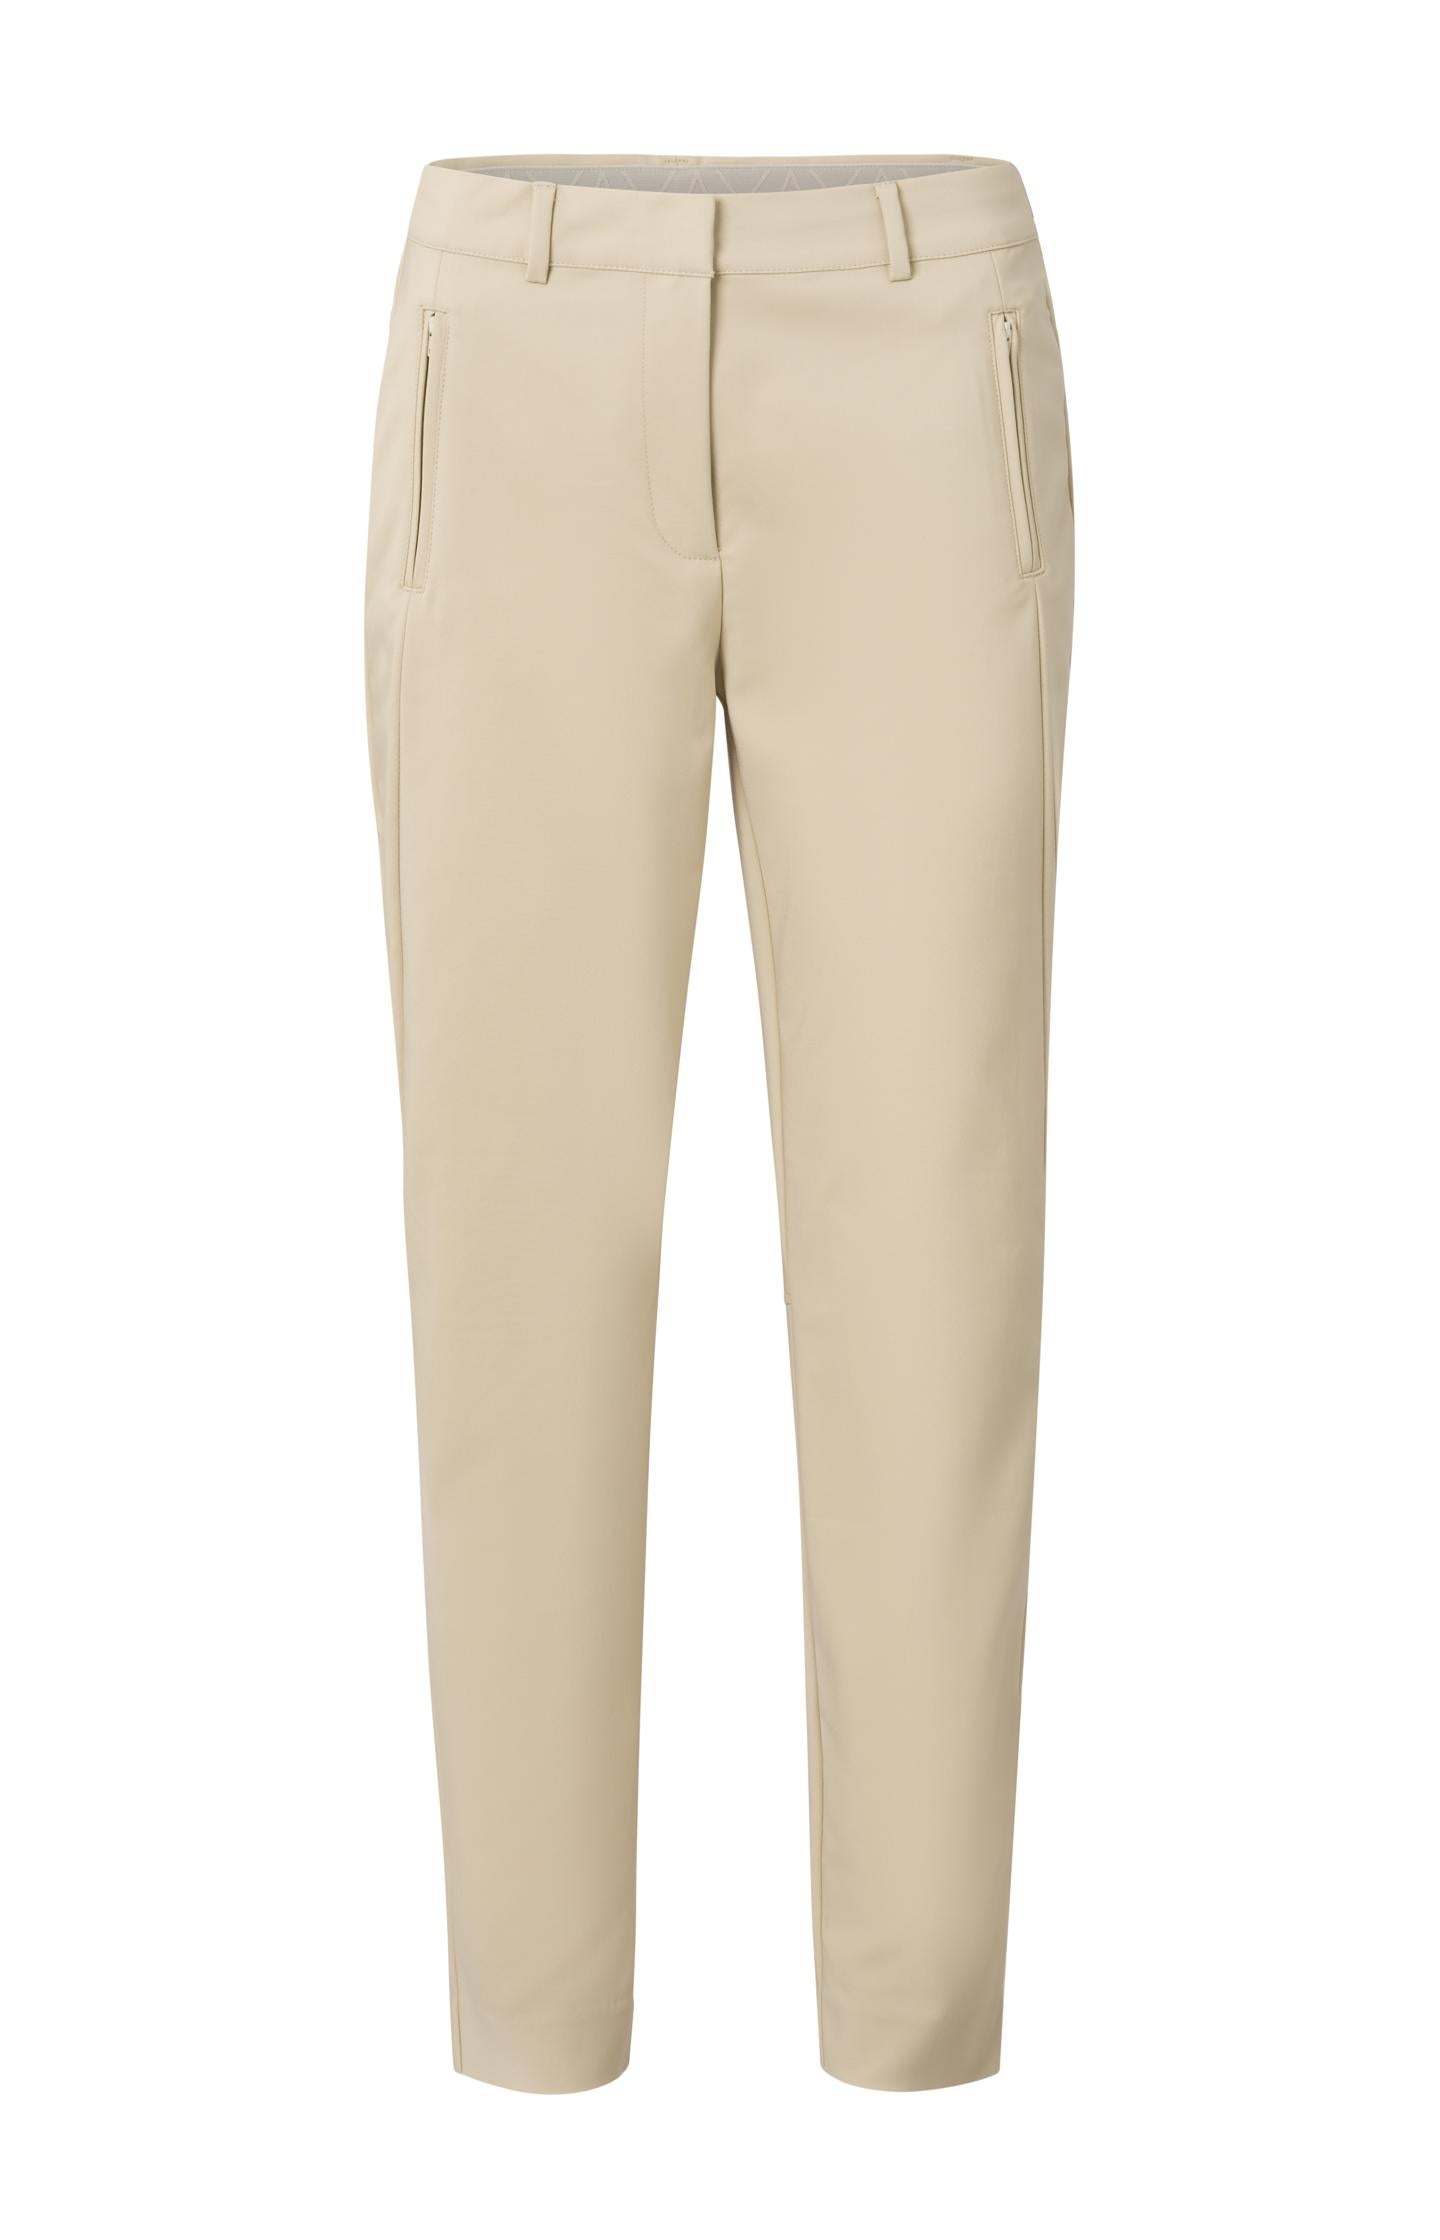 Trousers with straight leg, pockets and zip fly in slim fit - Type: product